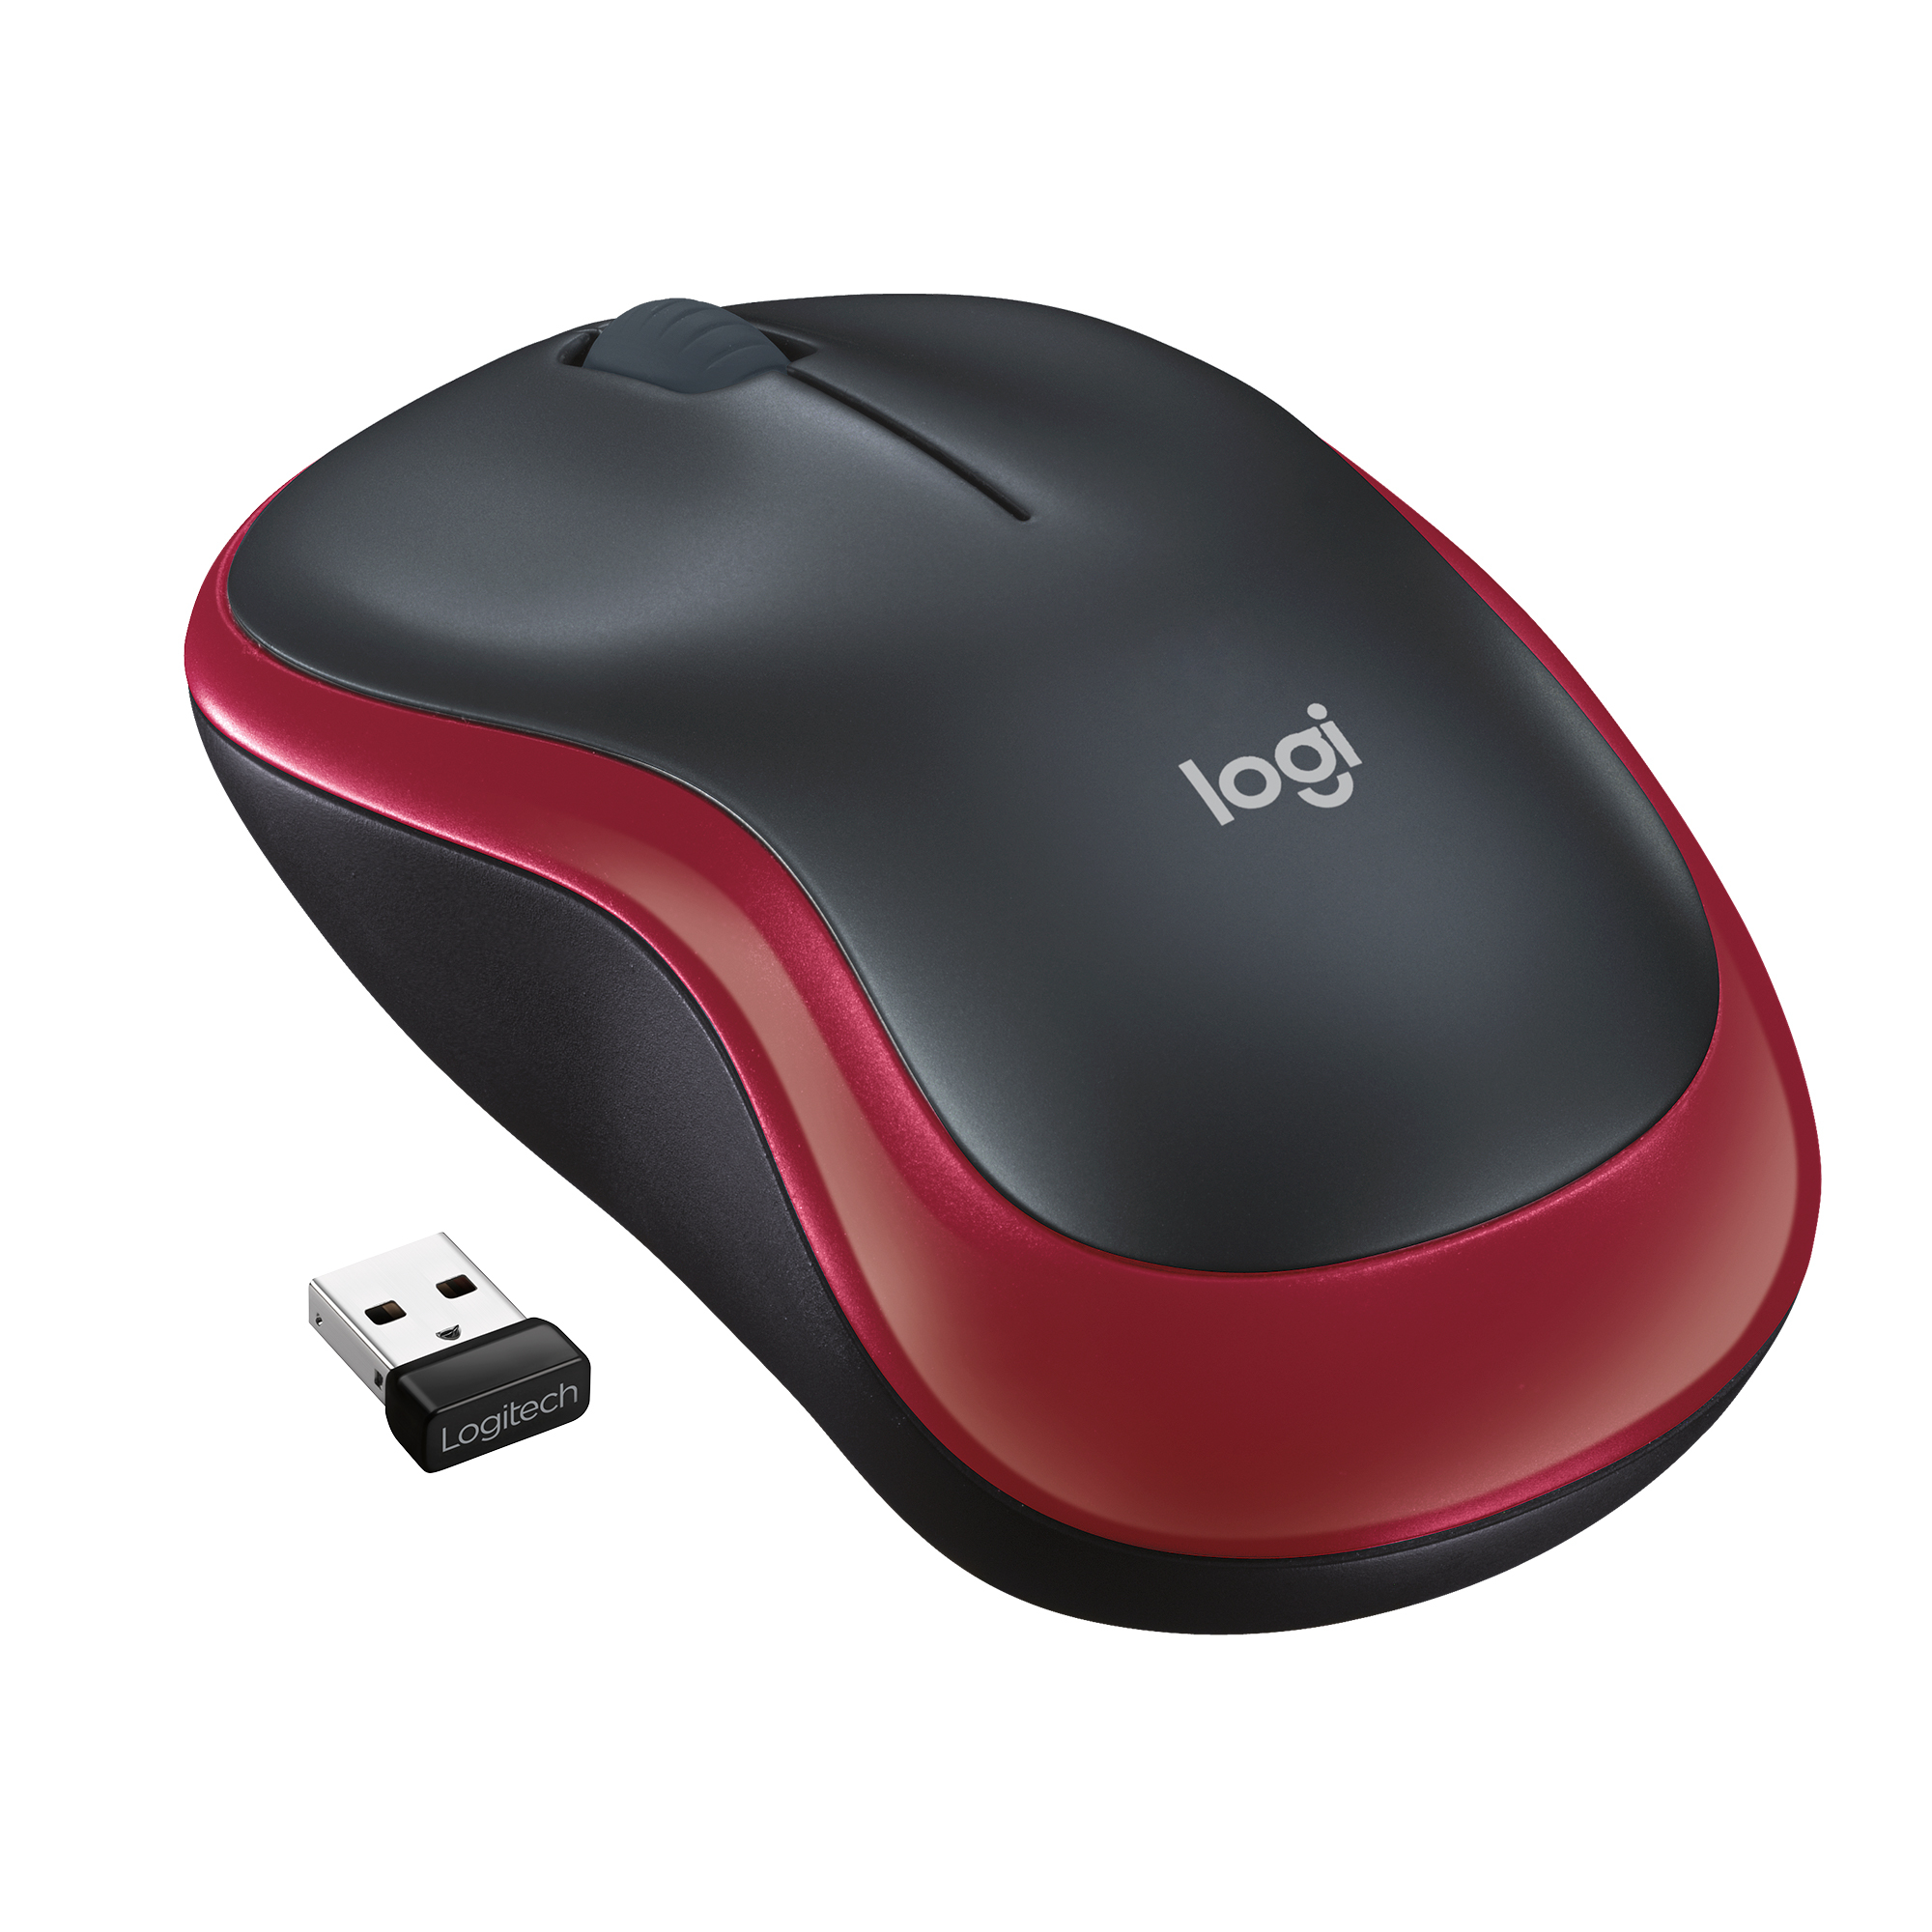 Logitech Wireless Mouse M185, 35 in distributor/wholesale stock for  resellers to sell - Stock In The Channel